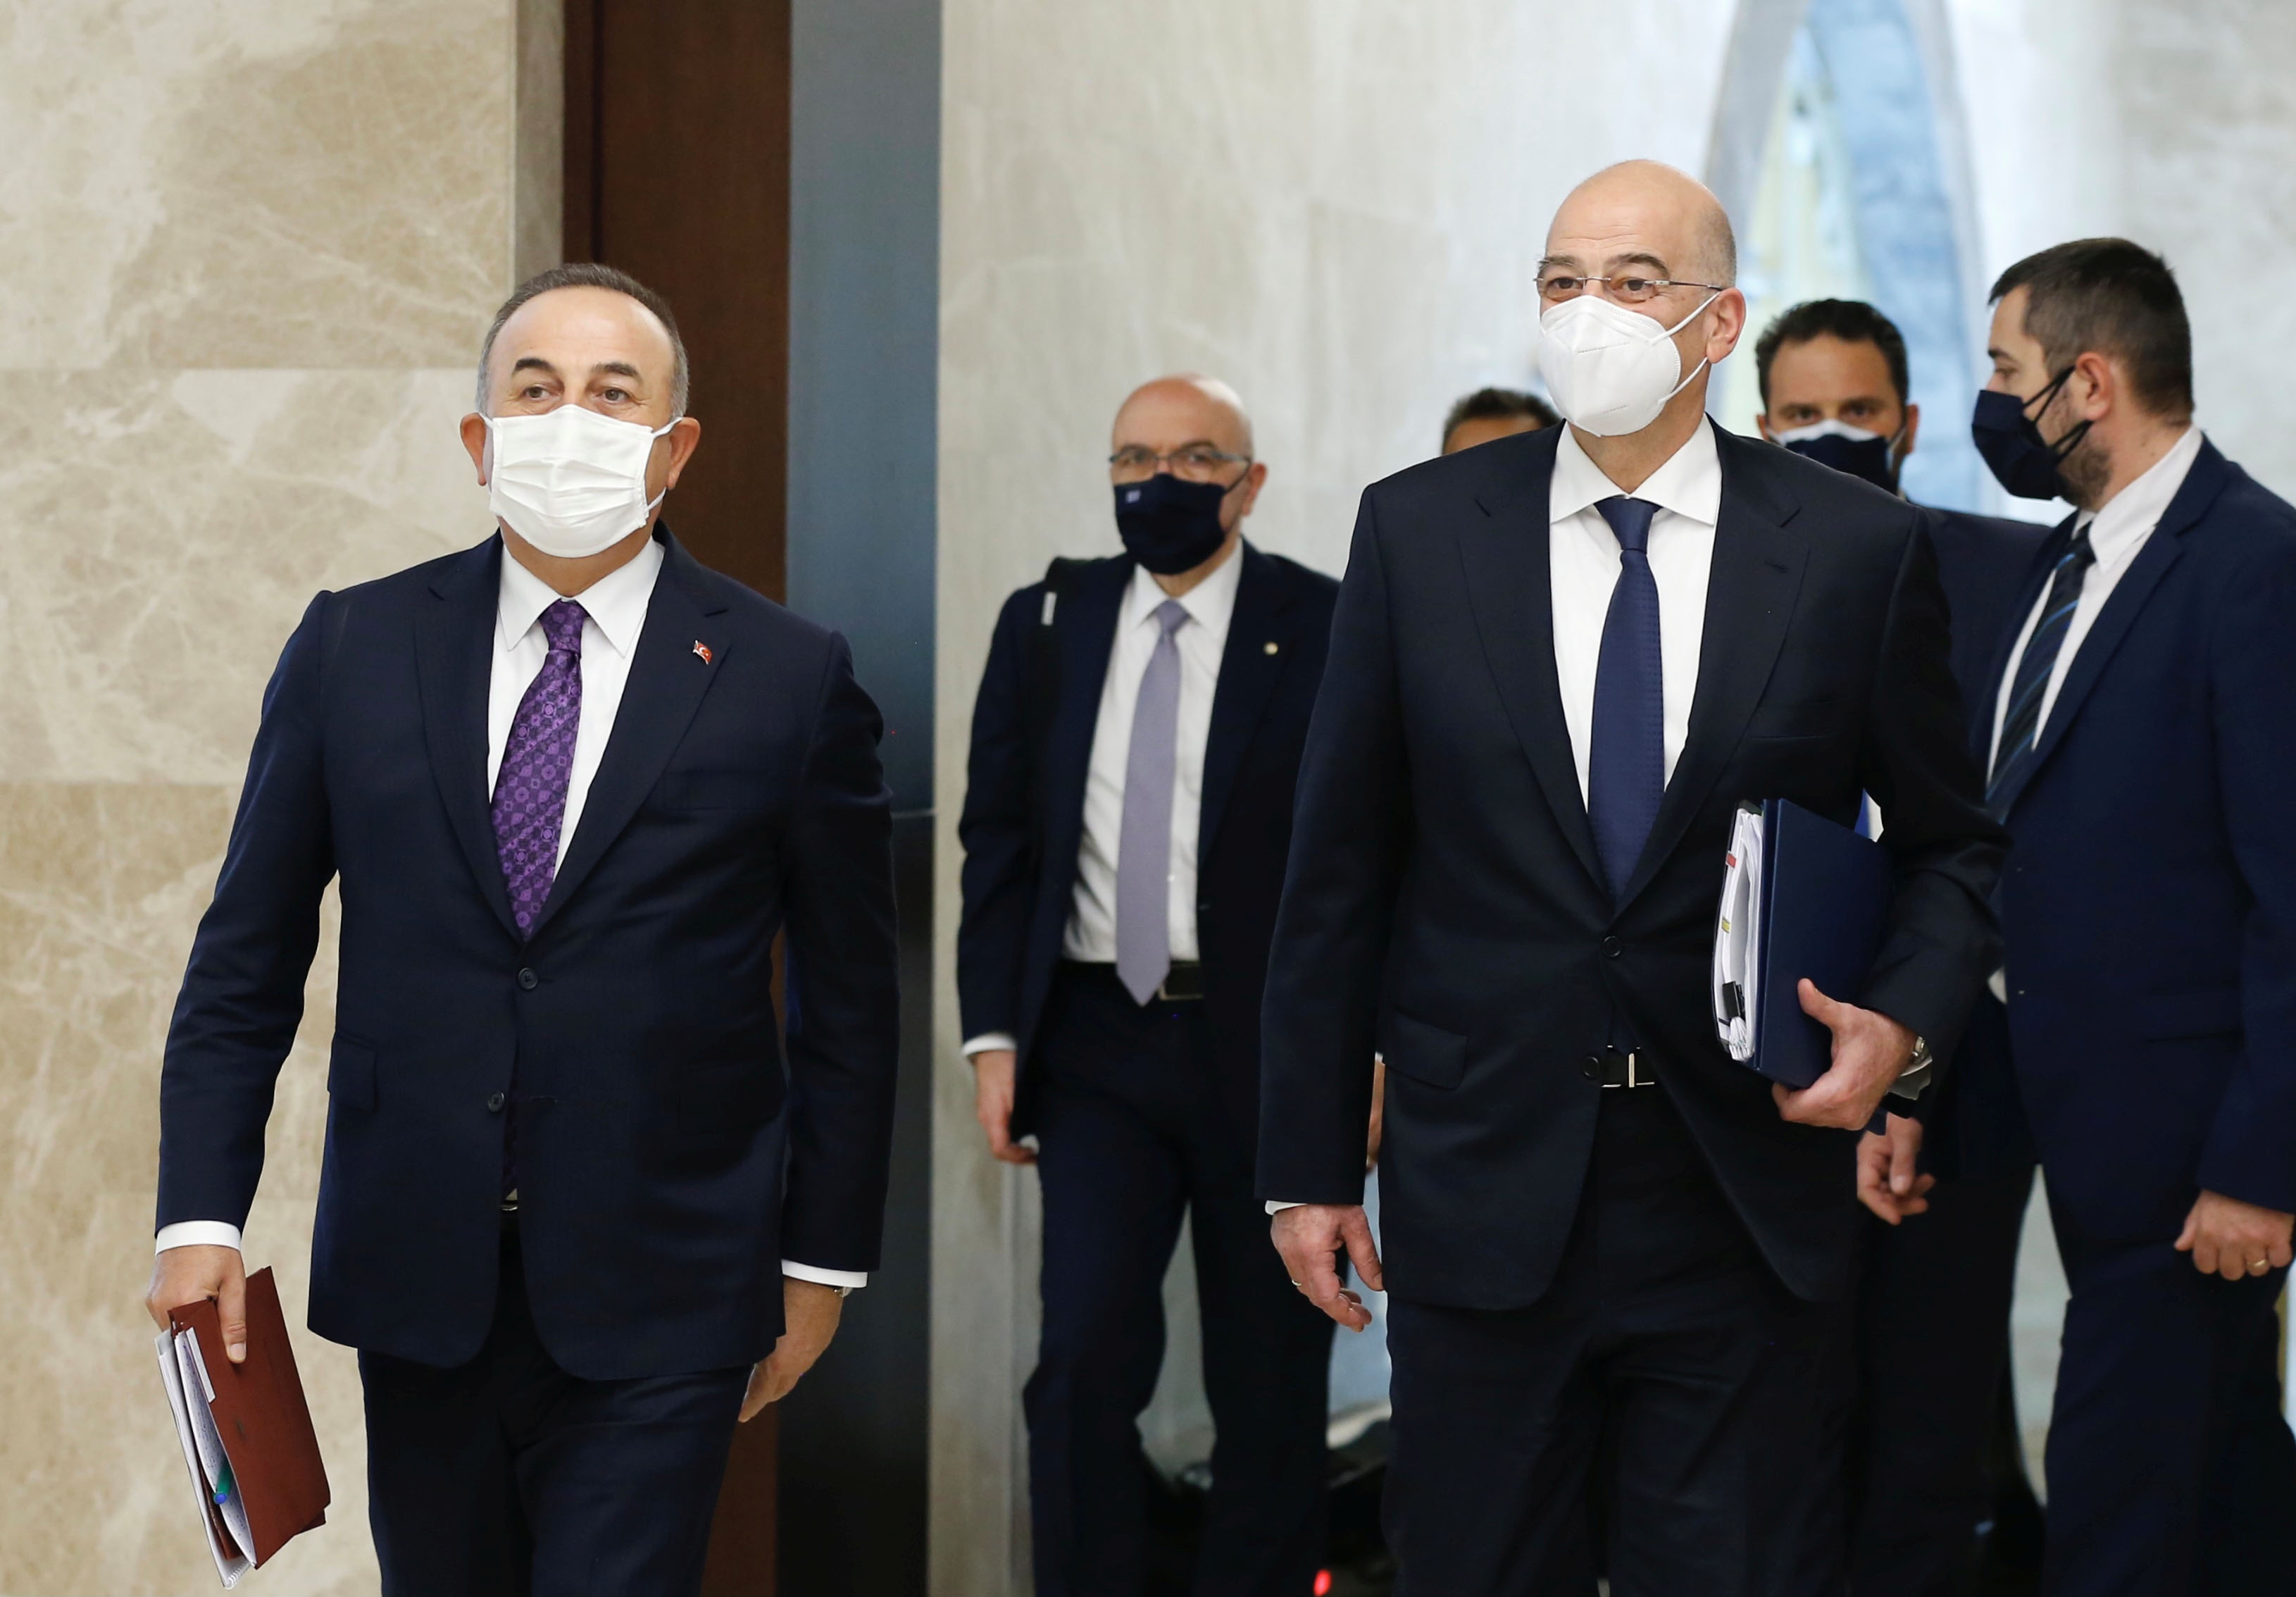 image Cavusoglu says futile to discuss Cyprus federation in Geneva, clashes openly with Dendias (Update 2)